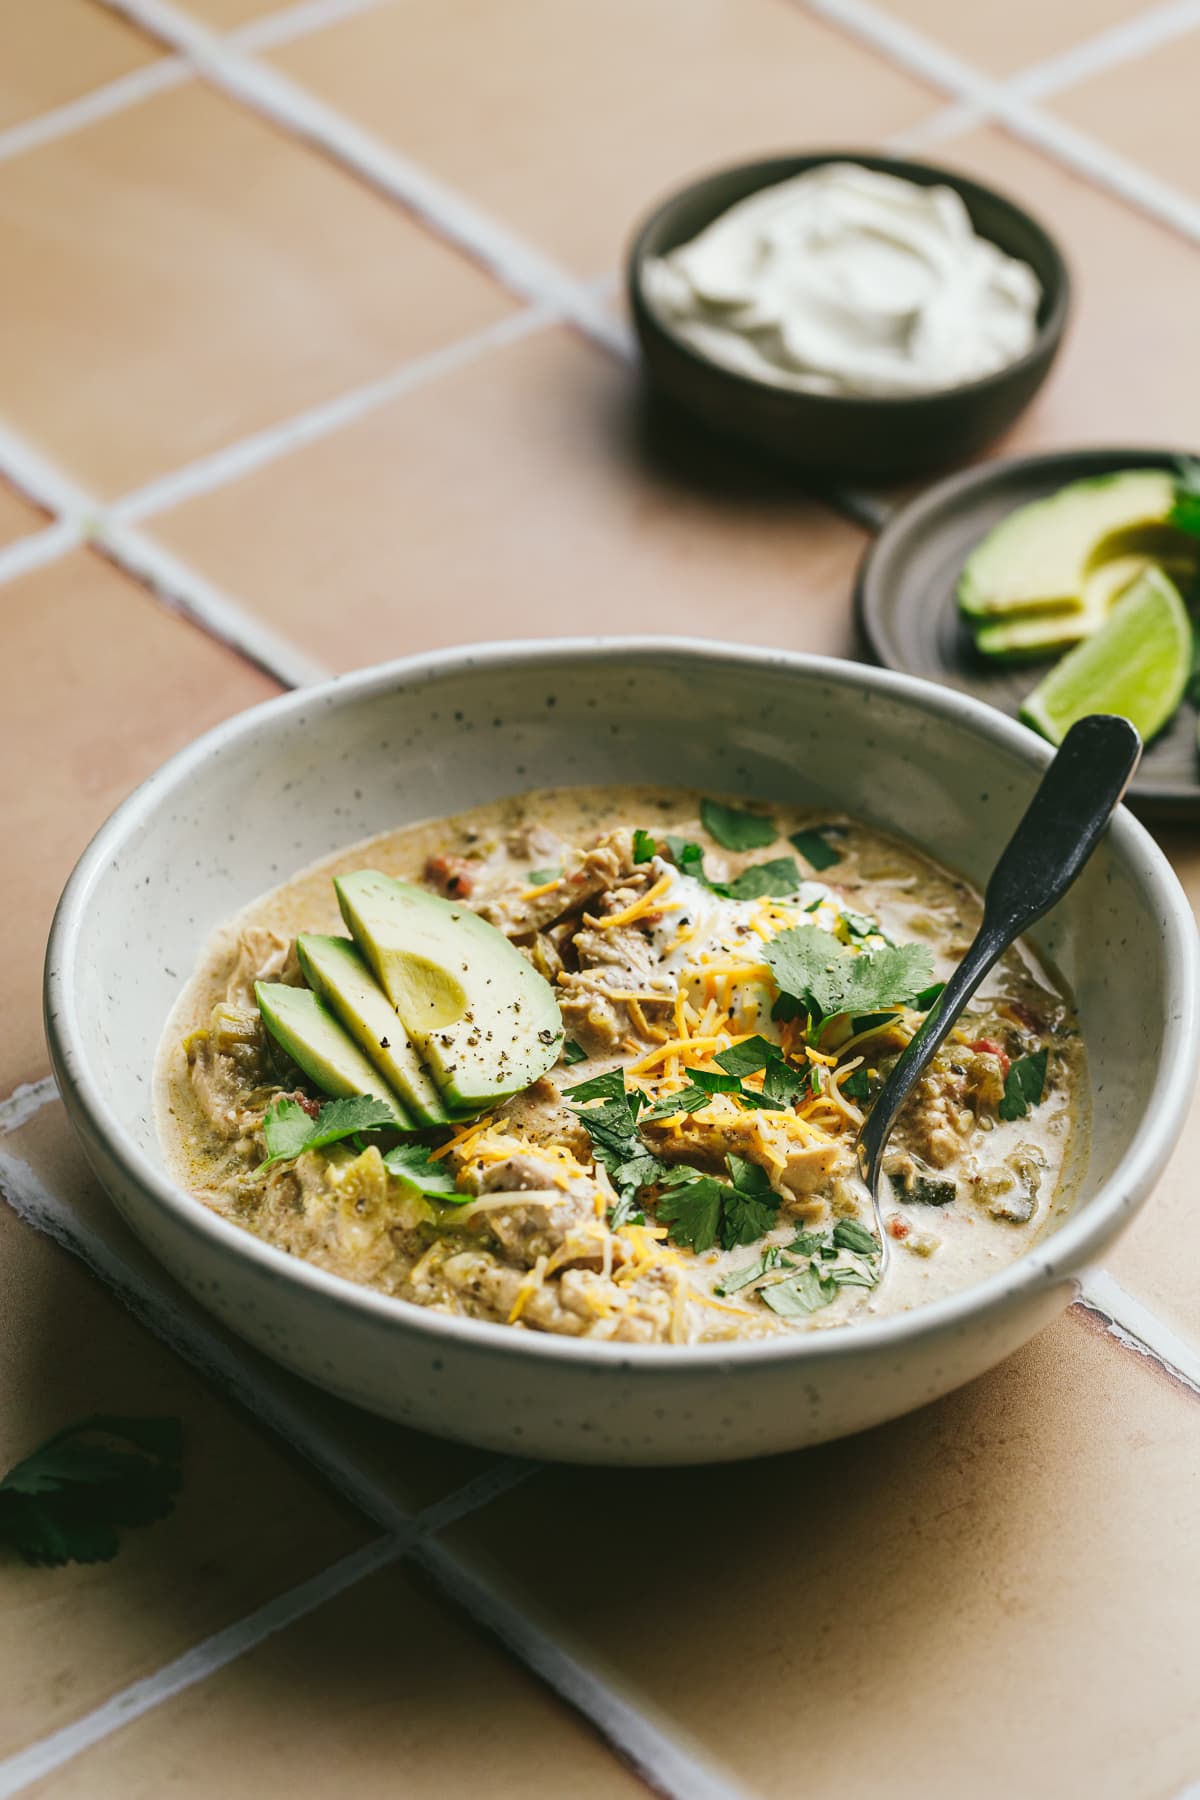 Crockpot green chili chicken soup in a serving bowl with toppings on a beige tile surface.